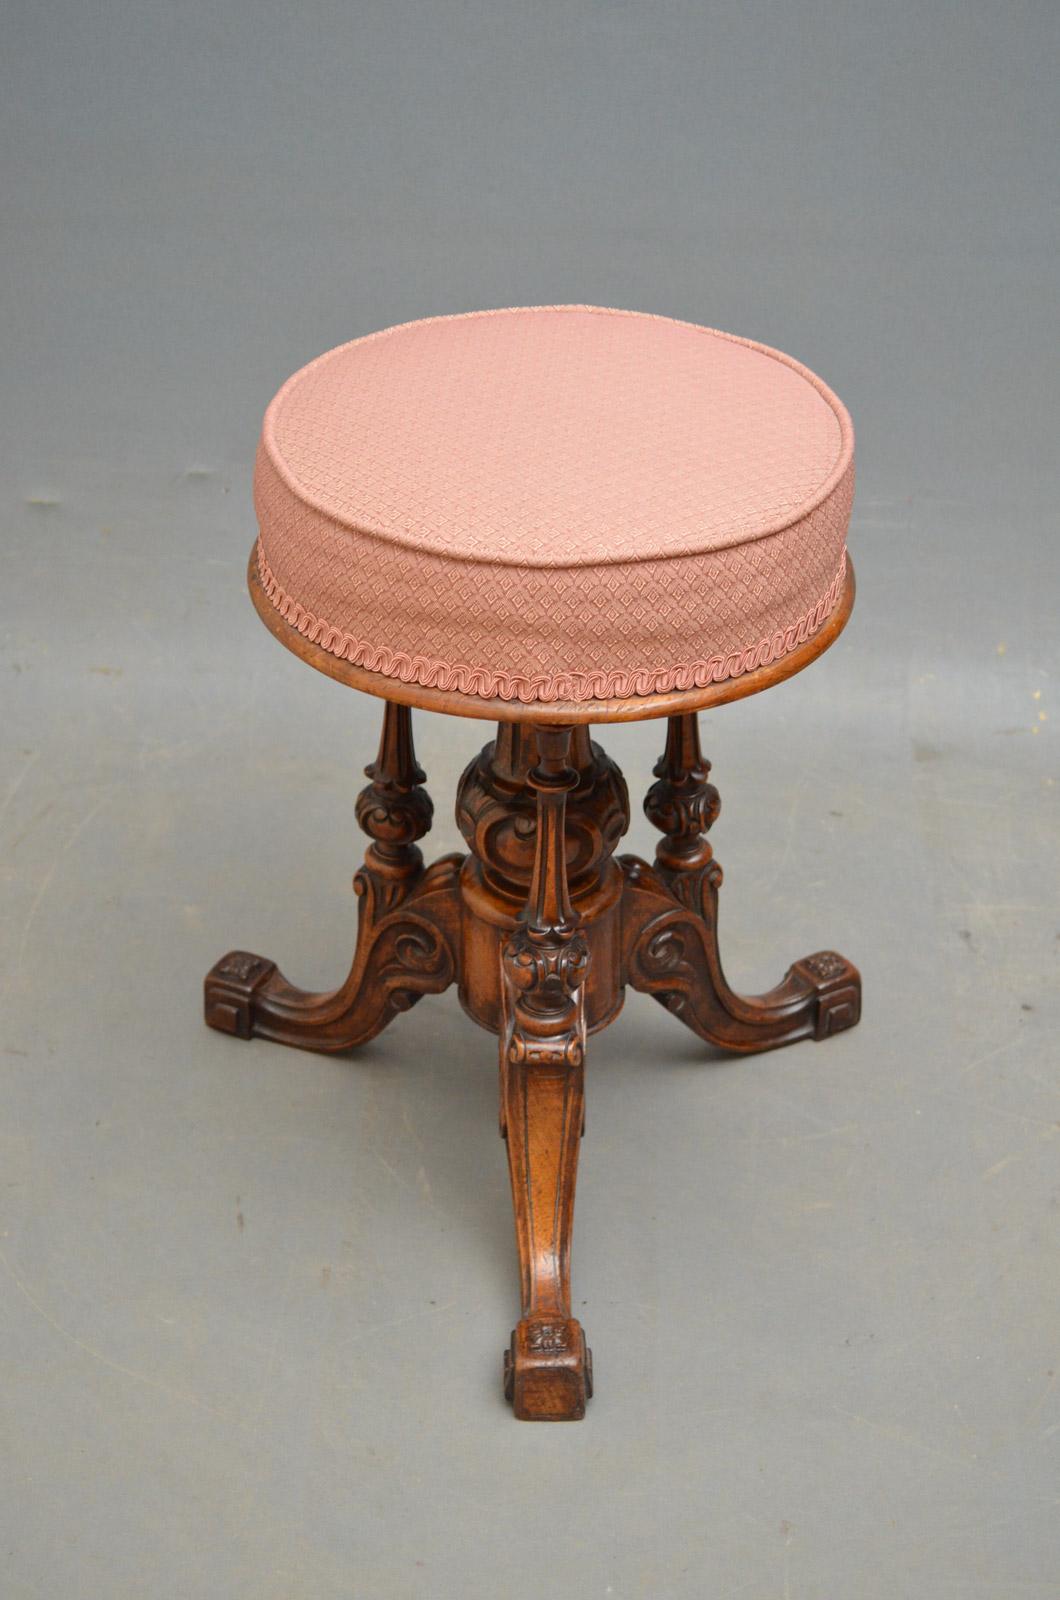 Sn4587 Victorian walnut revolving dressing table stool, having height adjustable seat on vase shaped column and 3 carved uprights terminating in 3 finely carved, downswpet legs. This antique stool retains its original finish, color and patina, circa